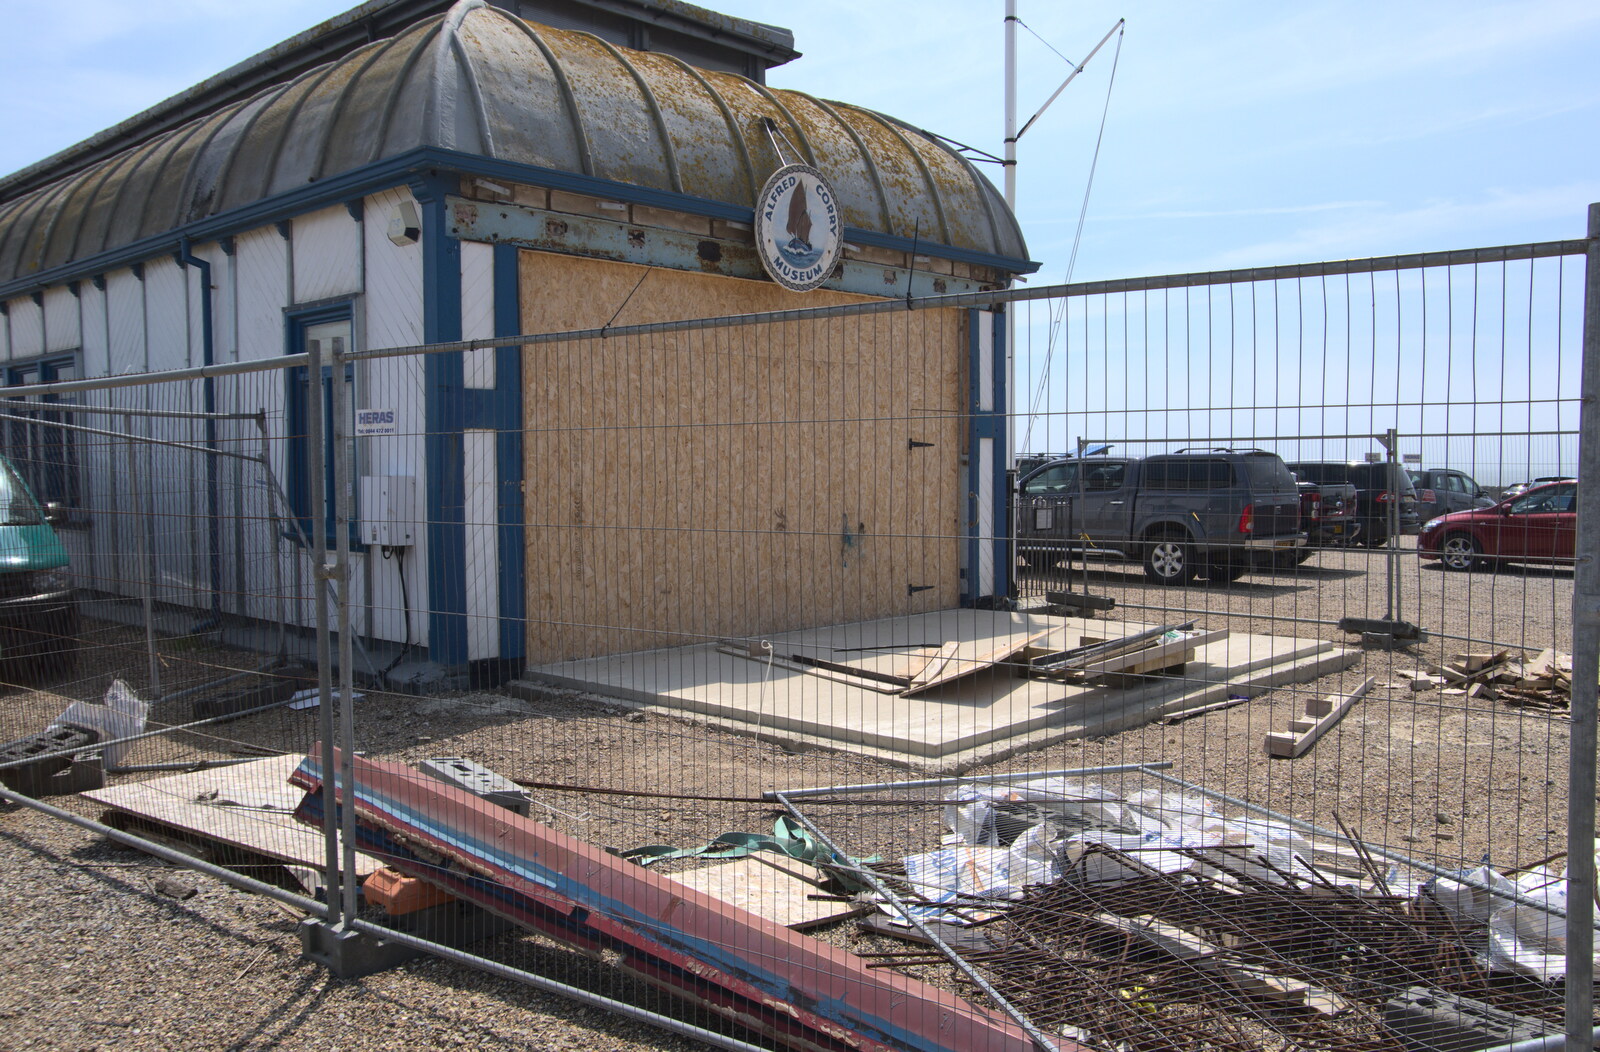 The Albert Corry lifeboat museum gets some repairs from A Return to Southwold, Suffolk - 14th June 2020